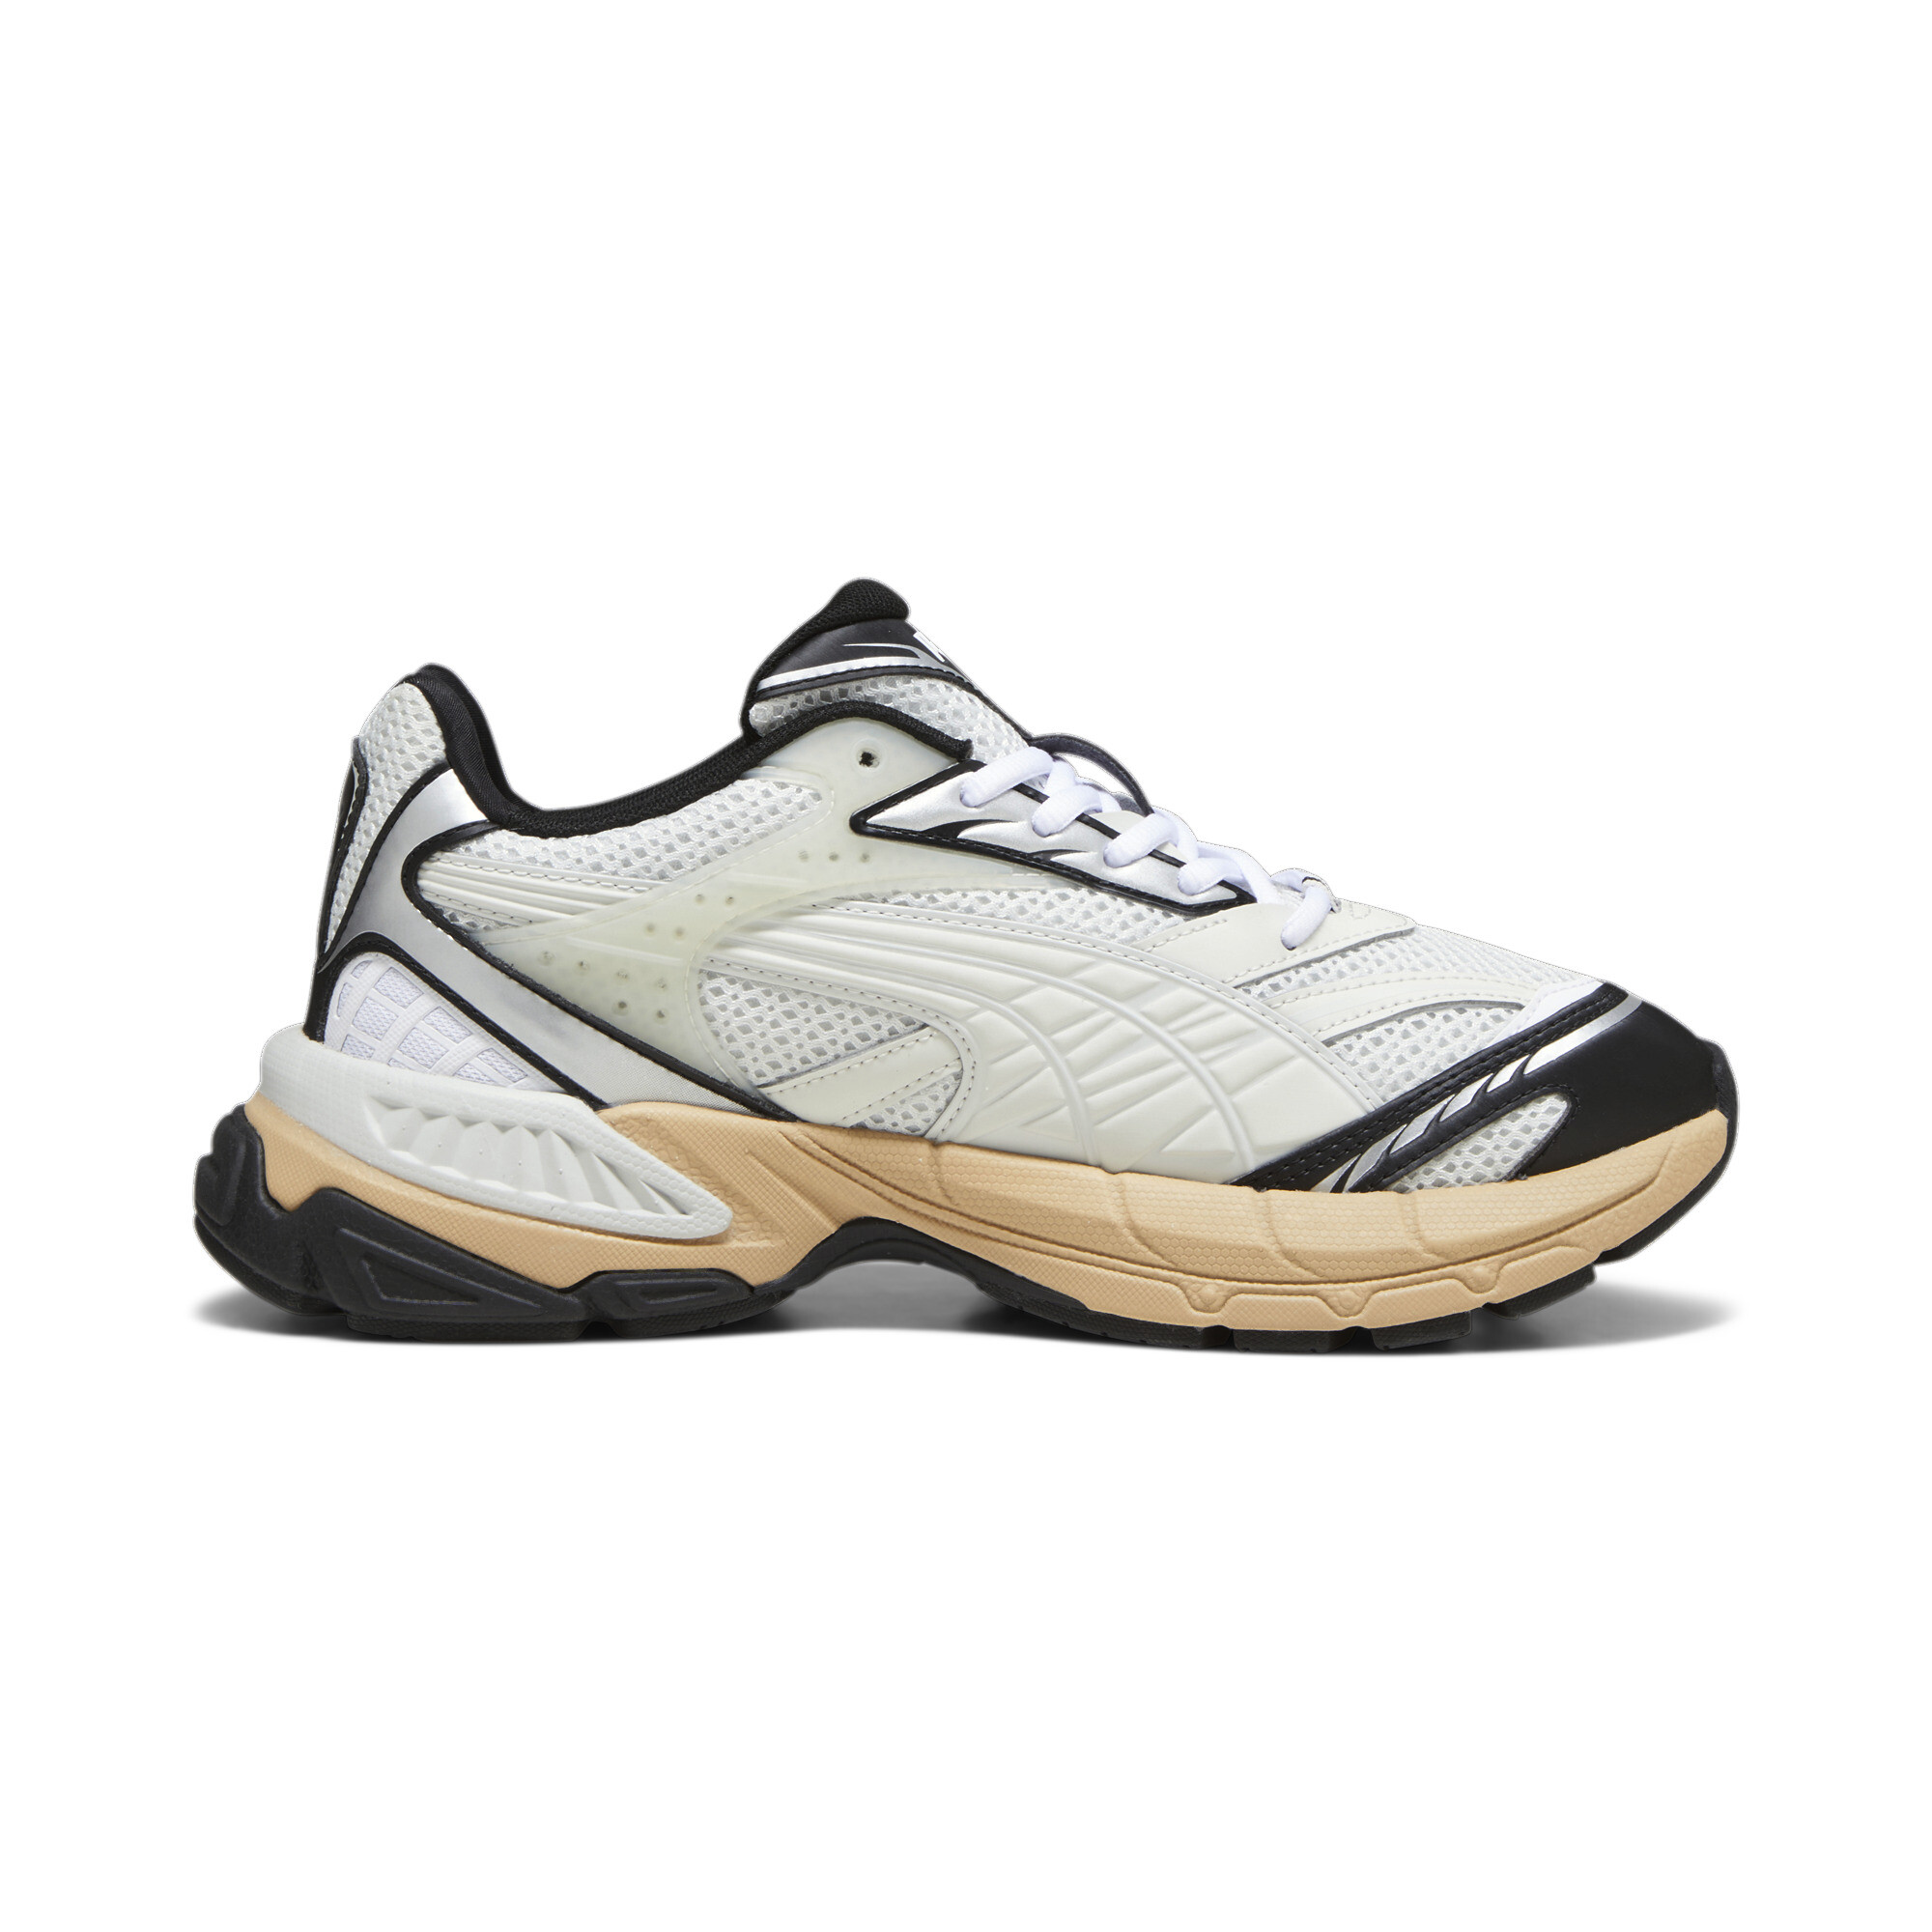 Puma Velophasis Technisch Sneakers, Gray, Size 48, Shoes